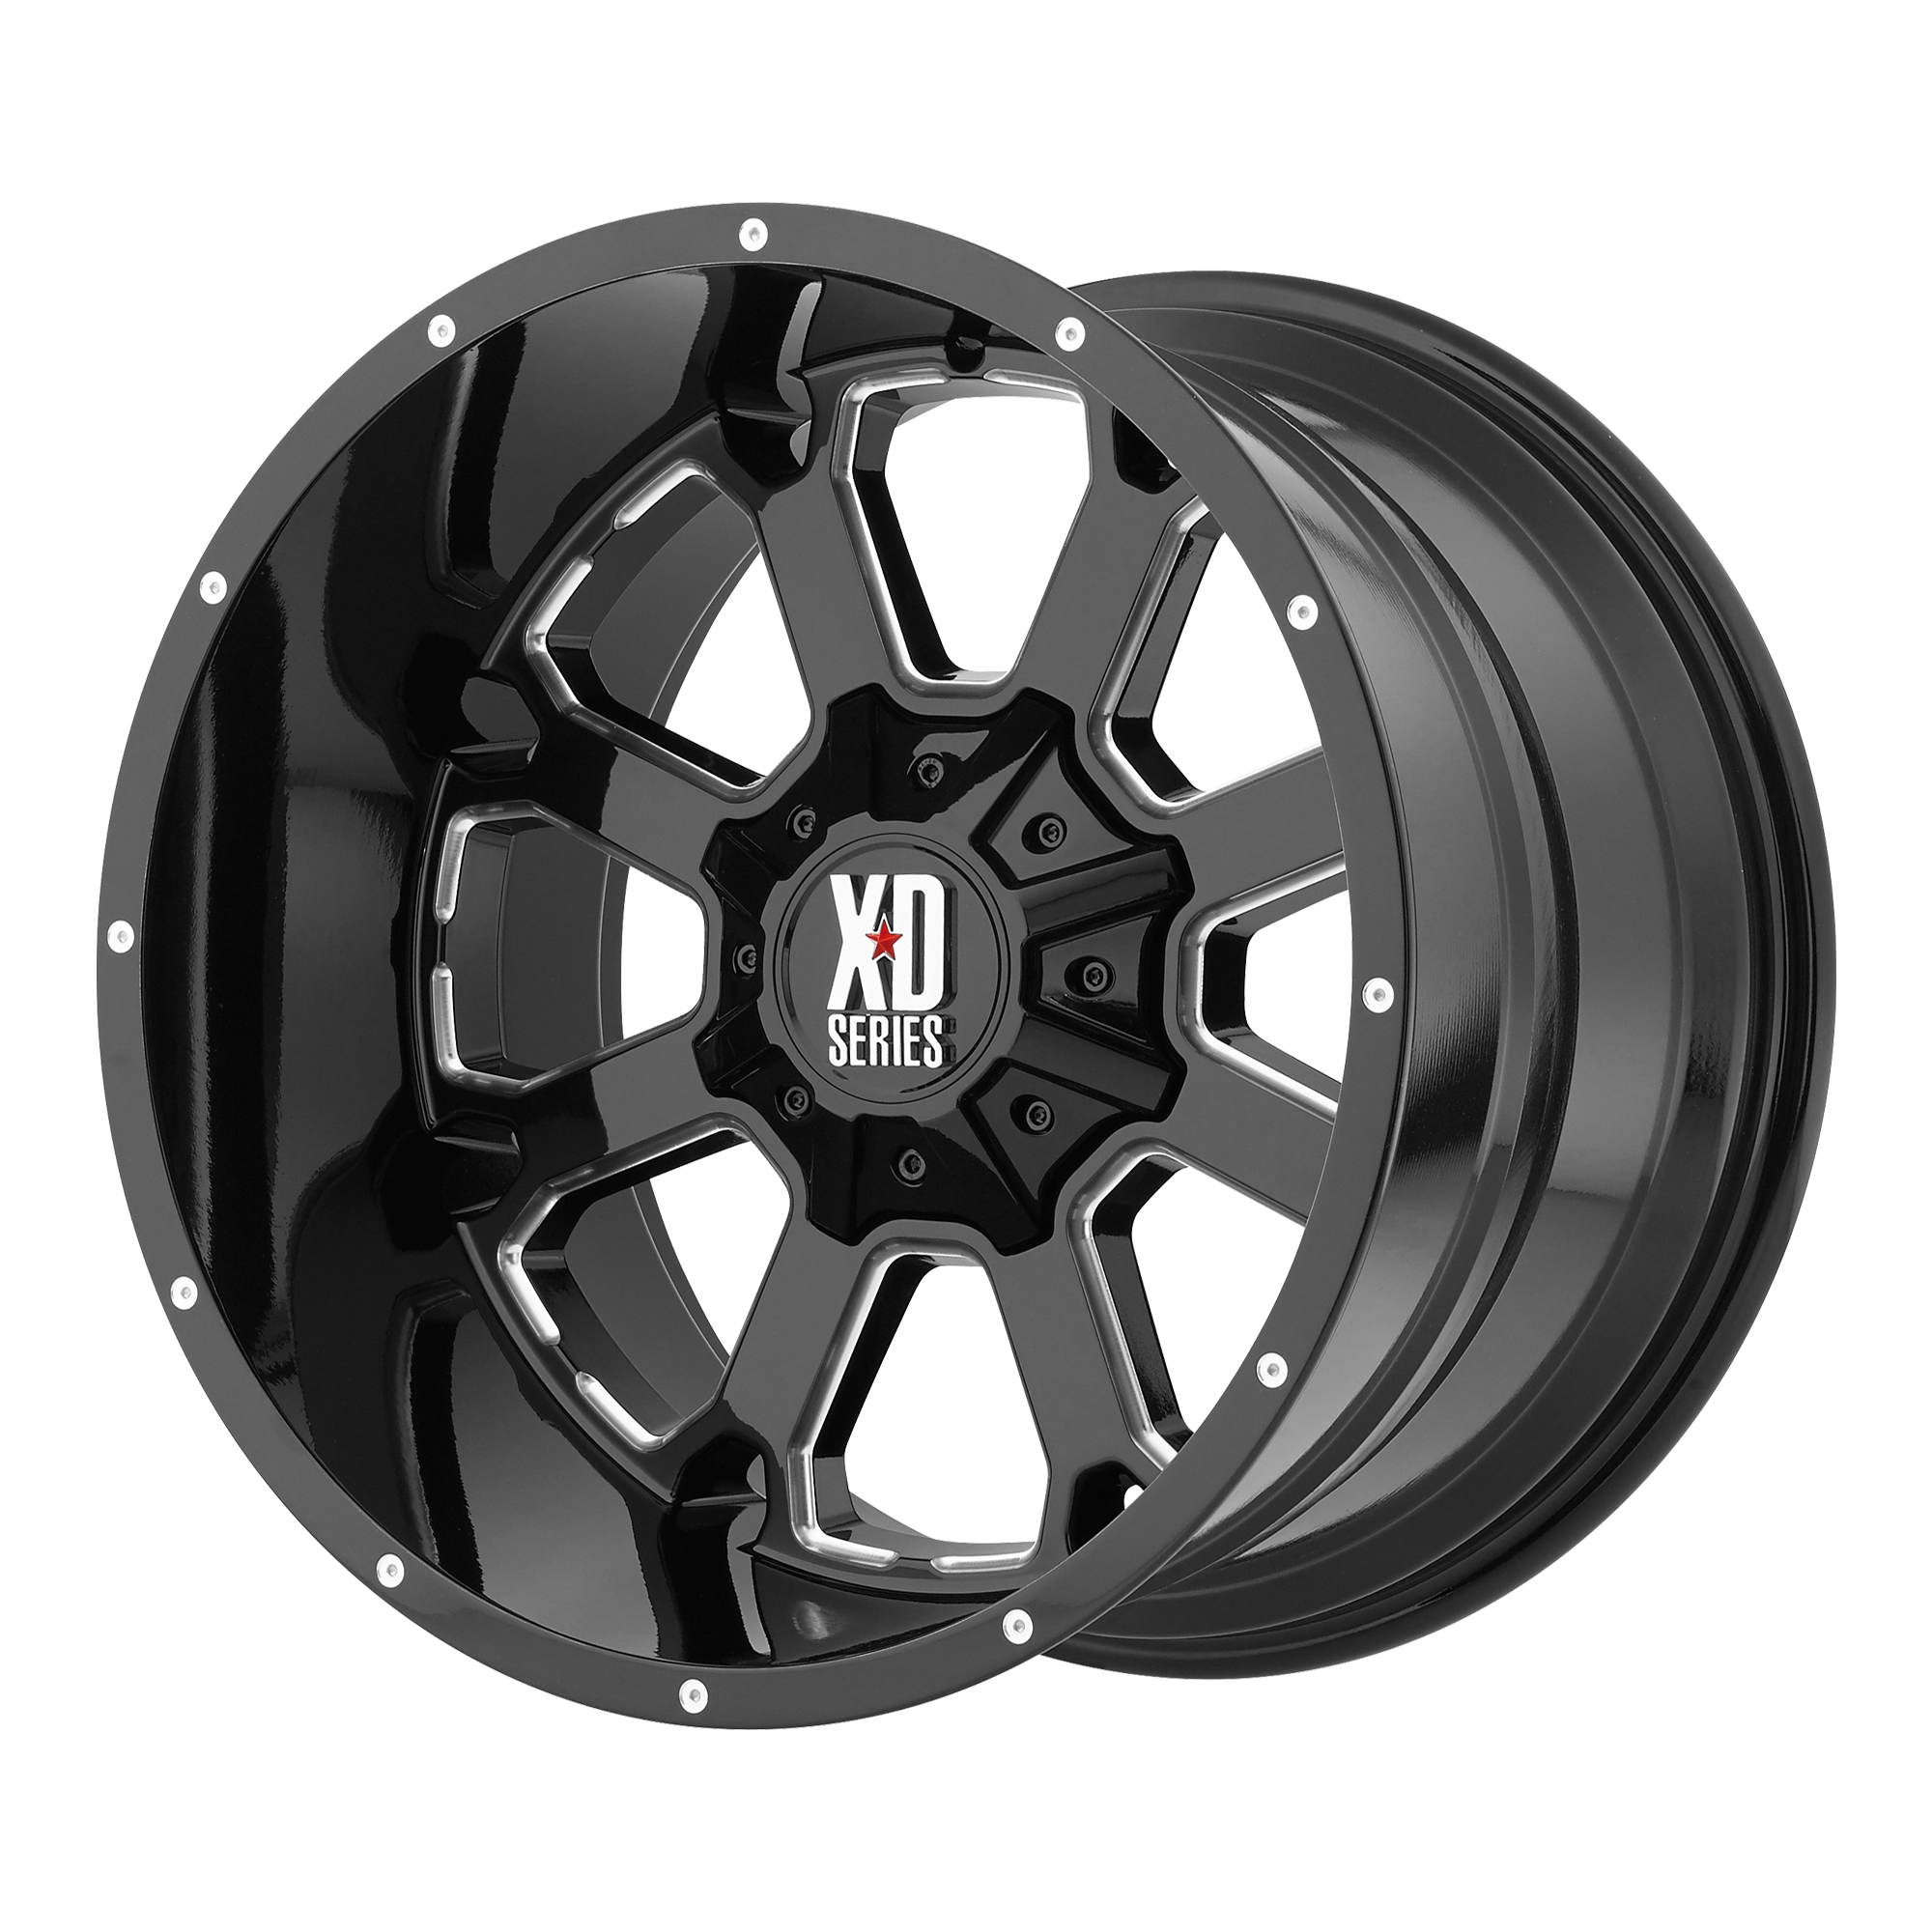 BUCK 25 20x9 8x180.00 GLOSS BLACK MILLED (18 mm) - Tires and Engine Performance